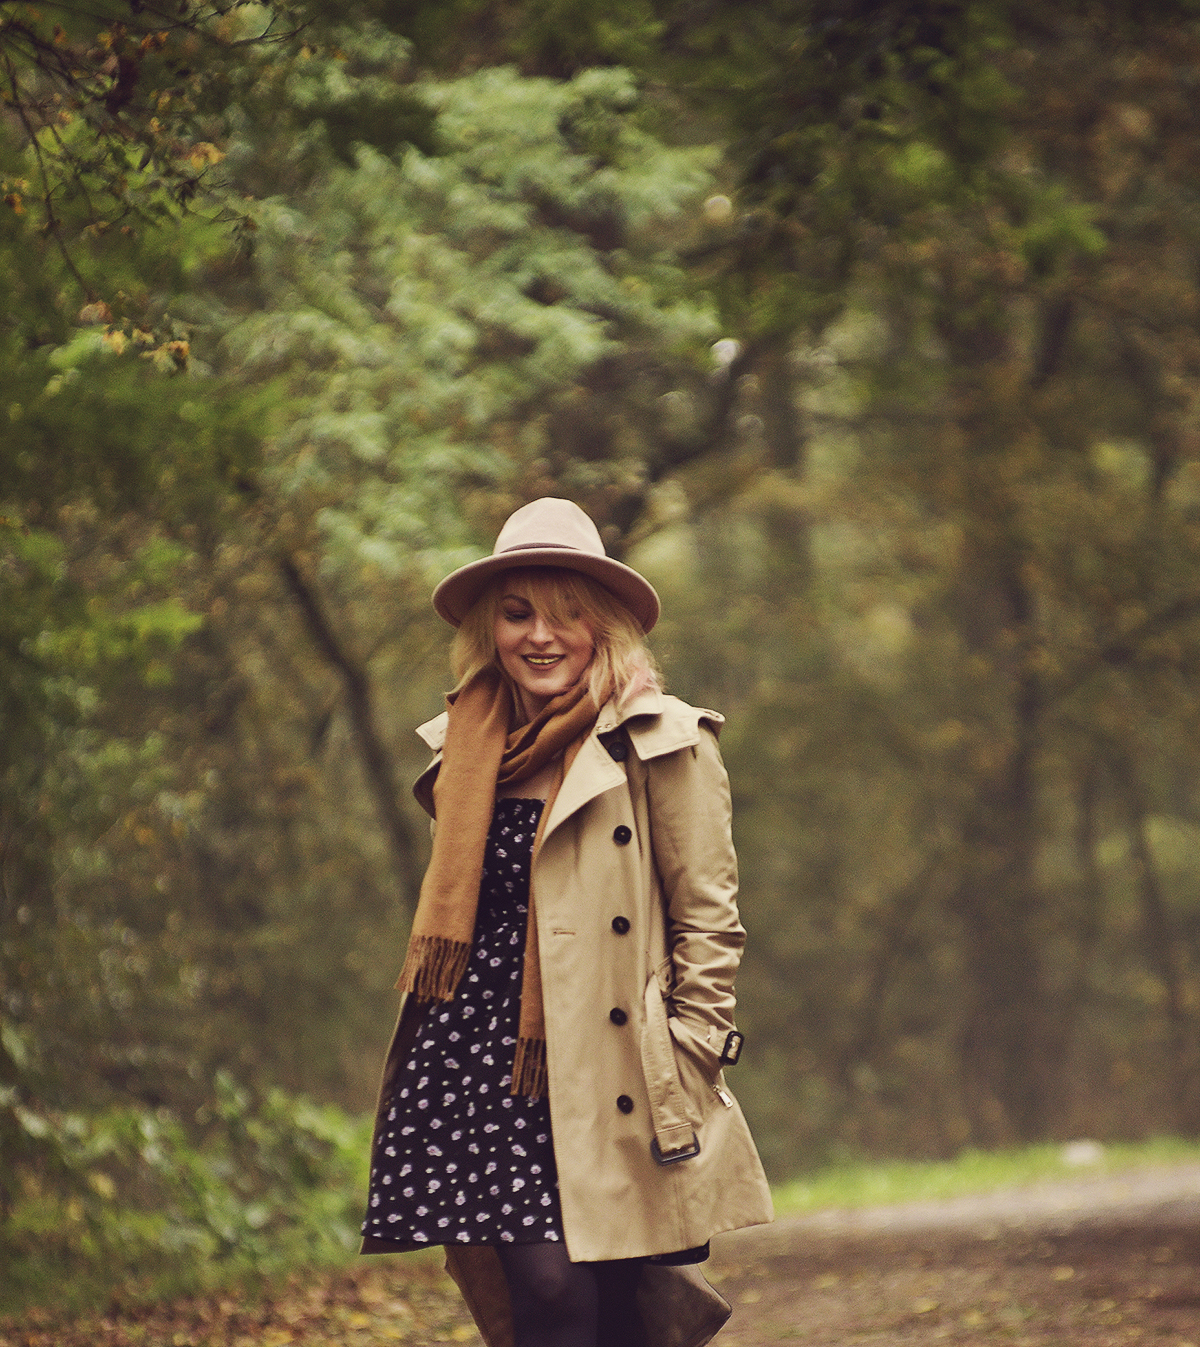 autumn look, fall look, autumn in the woods, trench coat, cashmere scarf, floral dress, beige fedora hat, autumn colors